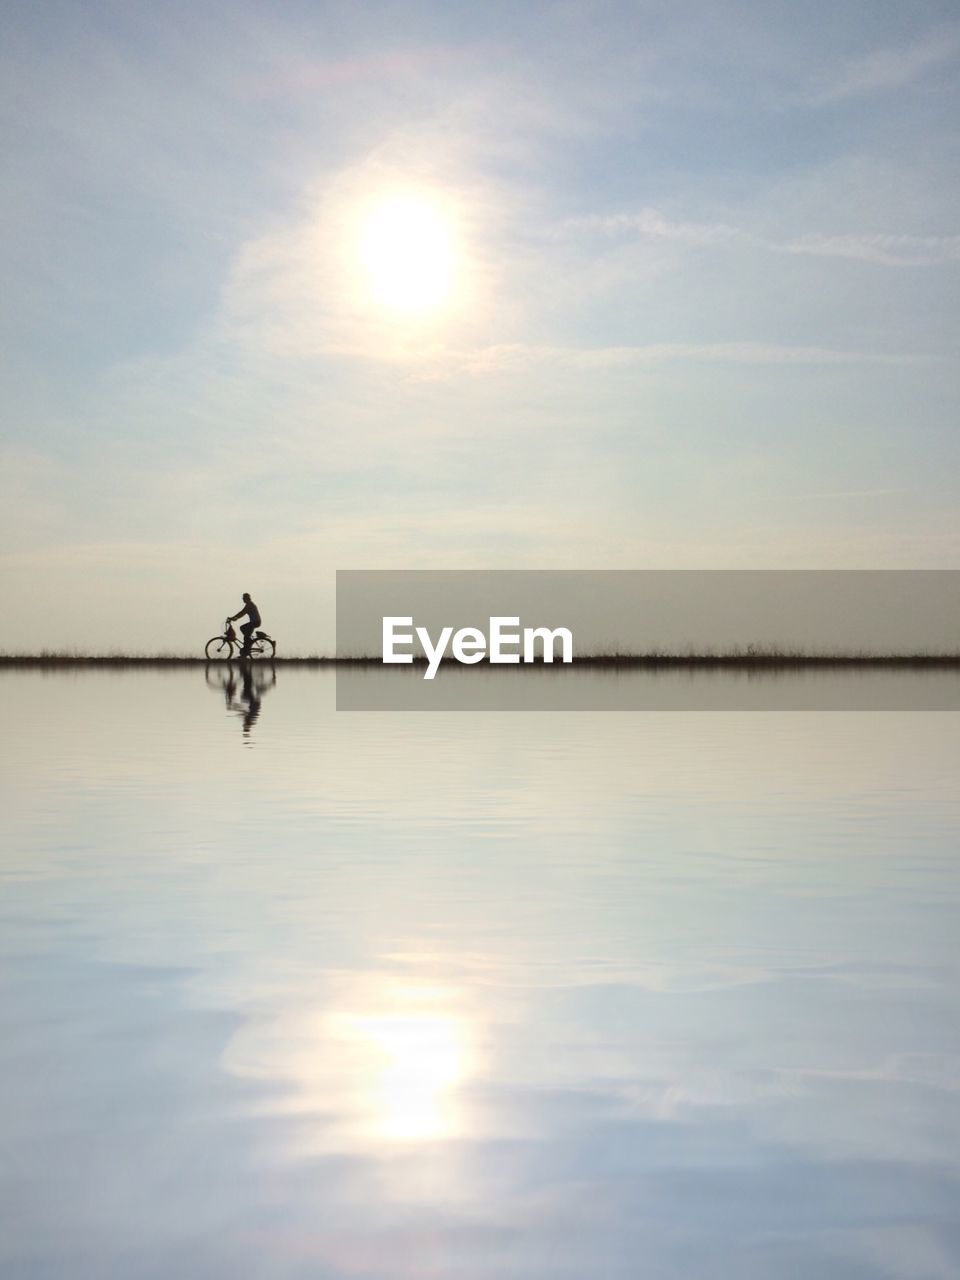 Reflection of man riding bicycle by lake at sunset